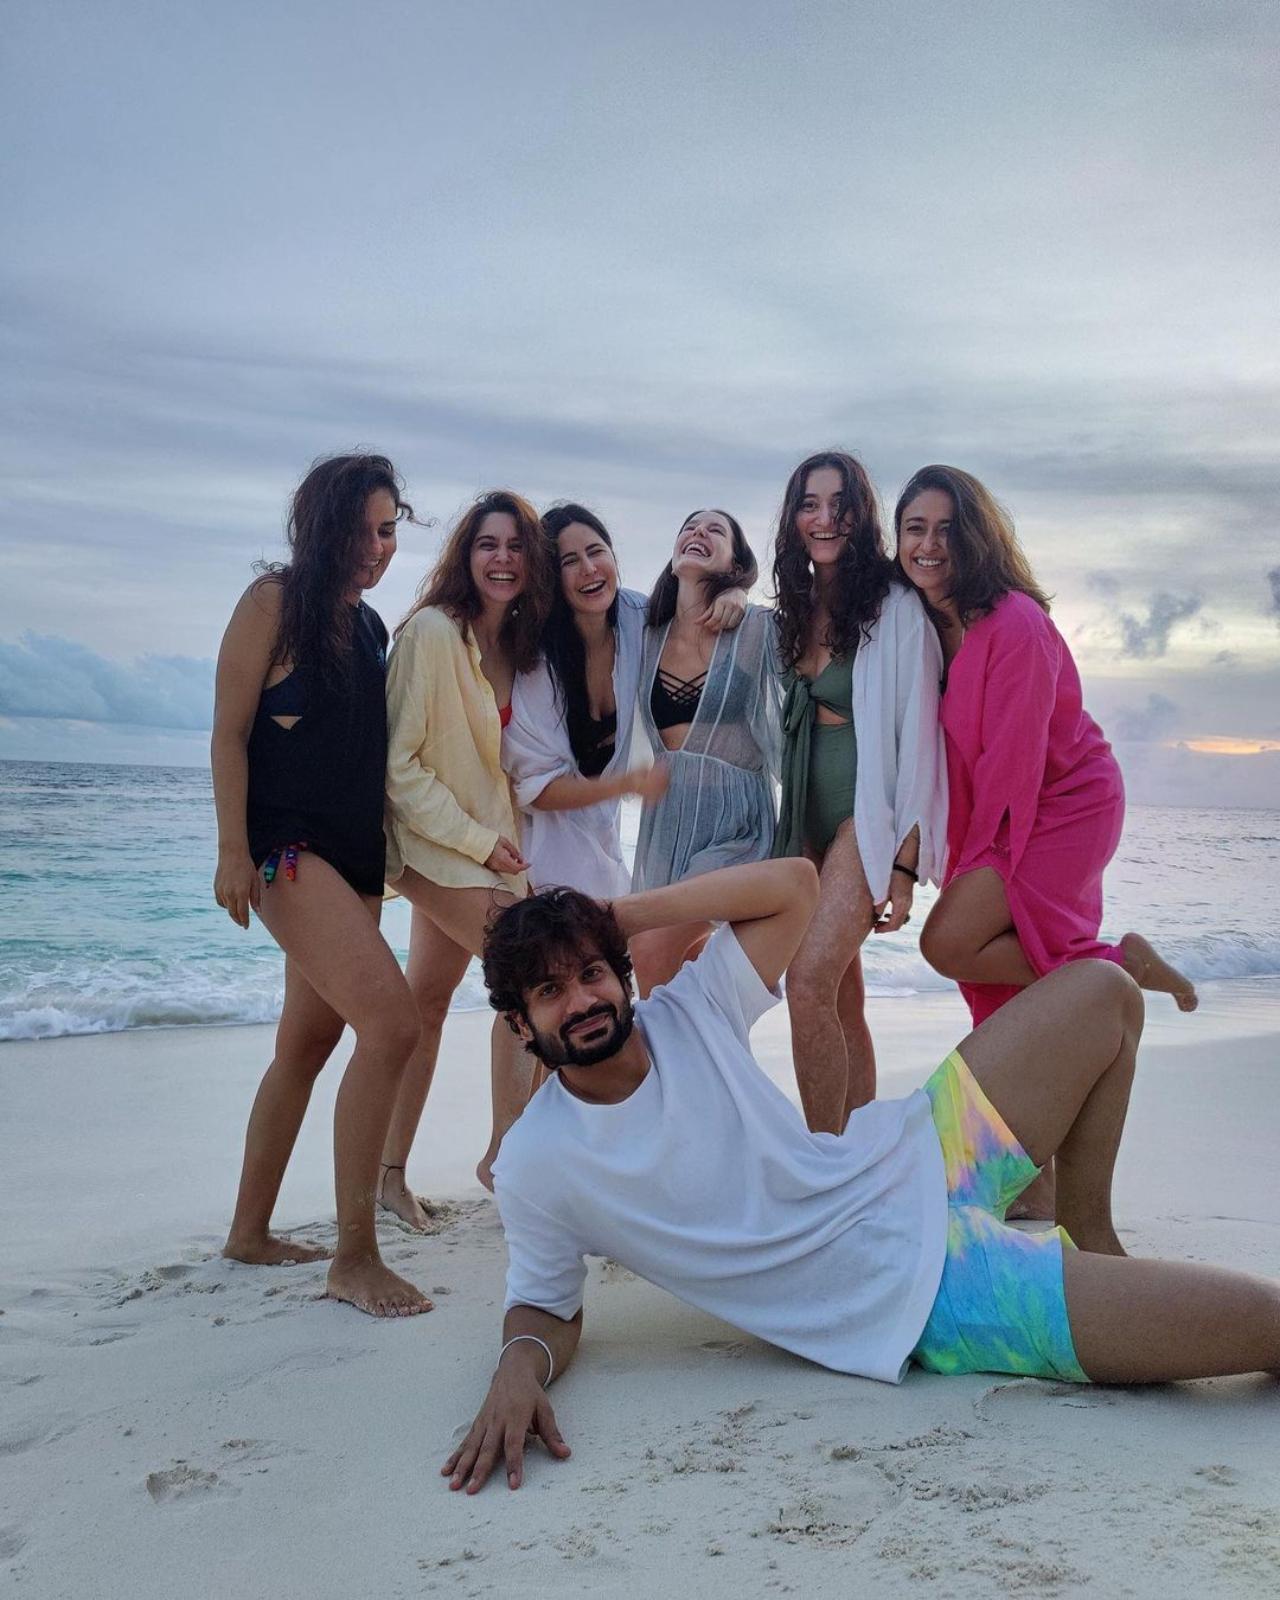 Katrina also shared a picture of Sunny Kaushal posing with her girl gang. Dressed in a white T-shirt and blue shorts, the 'Shiddat' star lied on the sand in front of the ladies